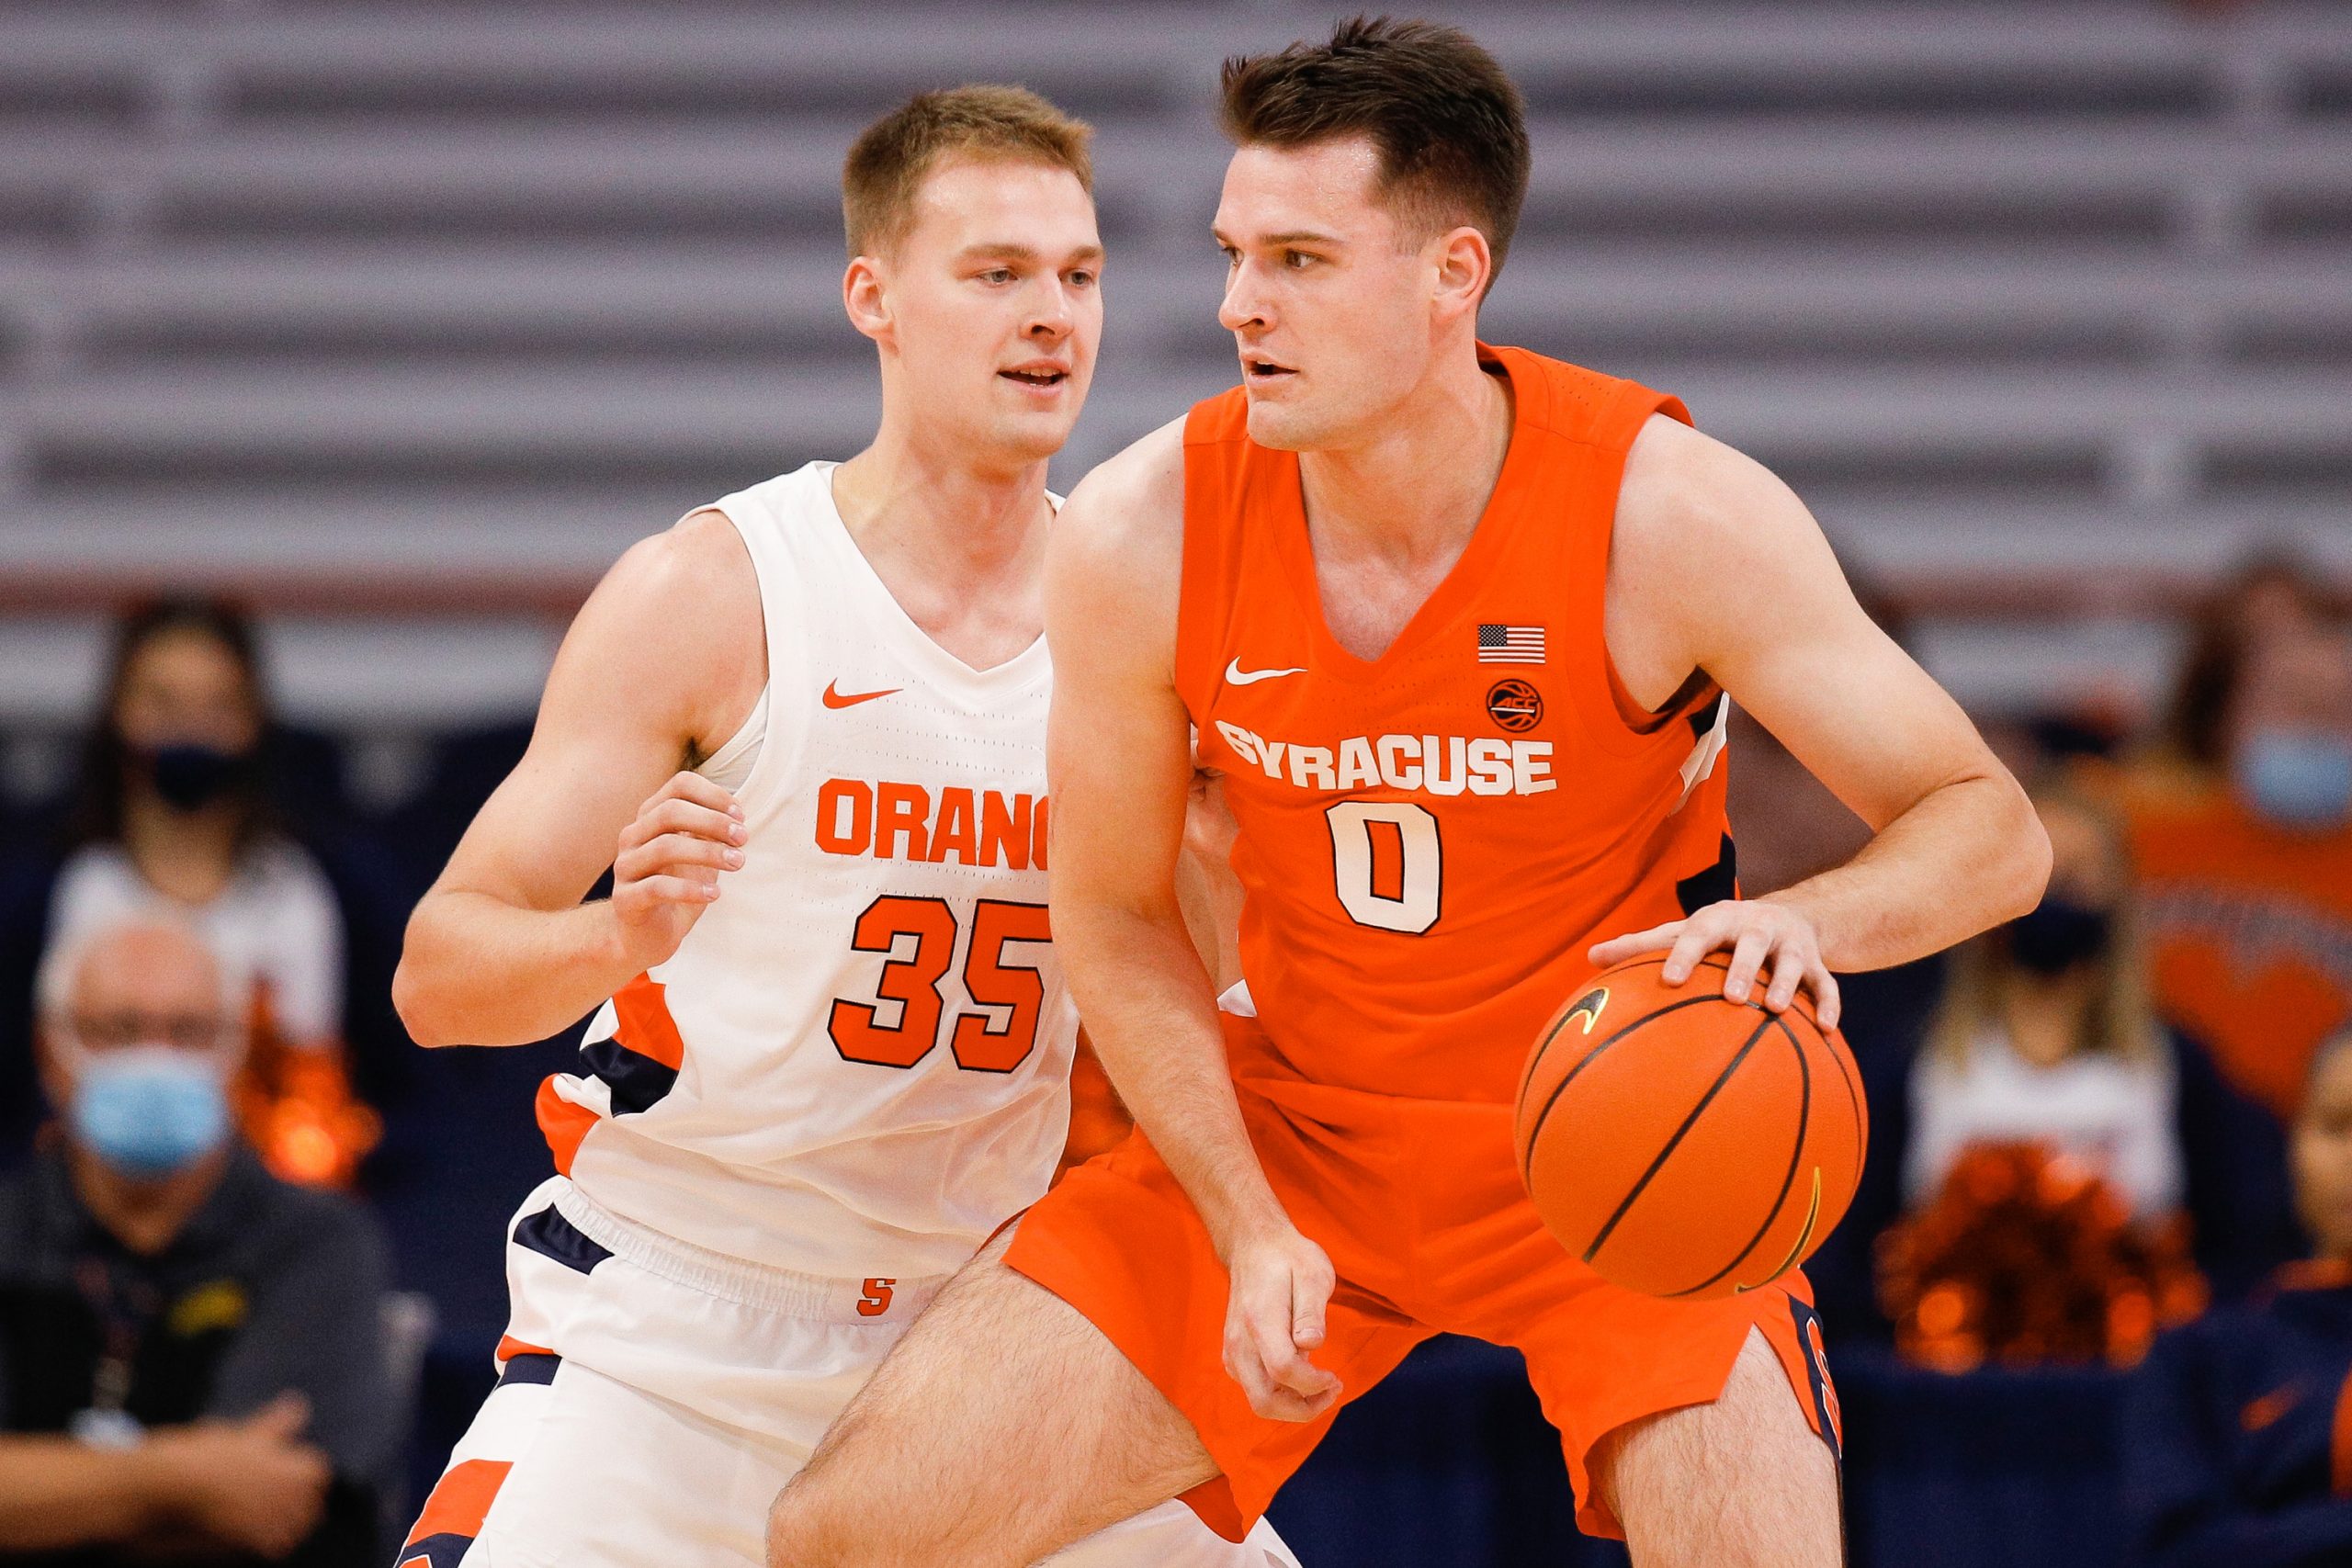 Buddy Boehim guards Jimmy Boehim III during the Orange Tip-Off scrimmage at the Dome on October 22, 2021.